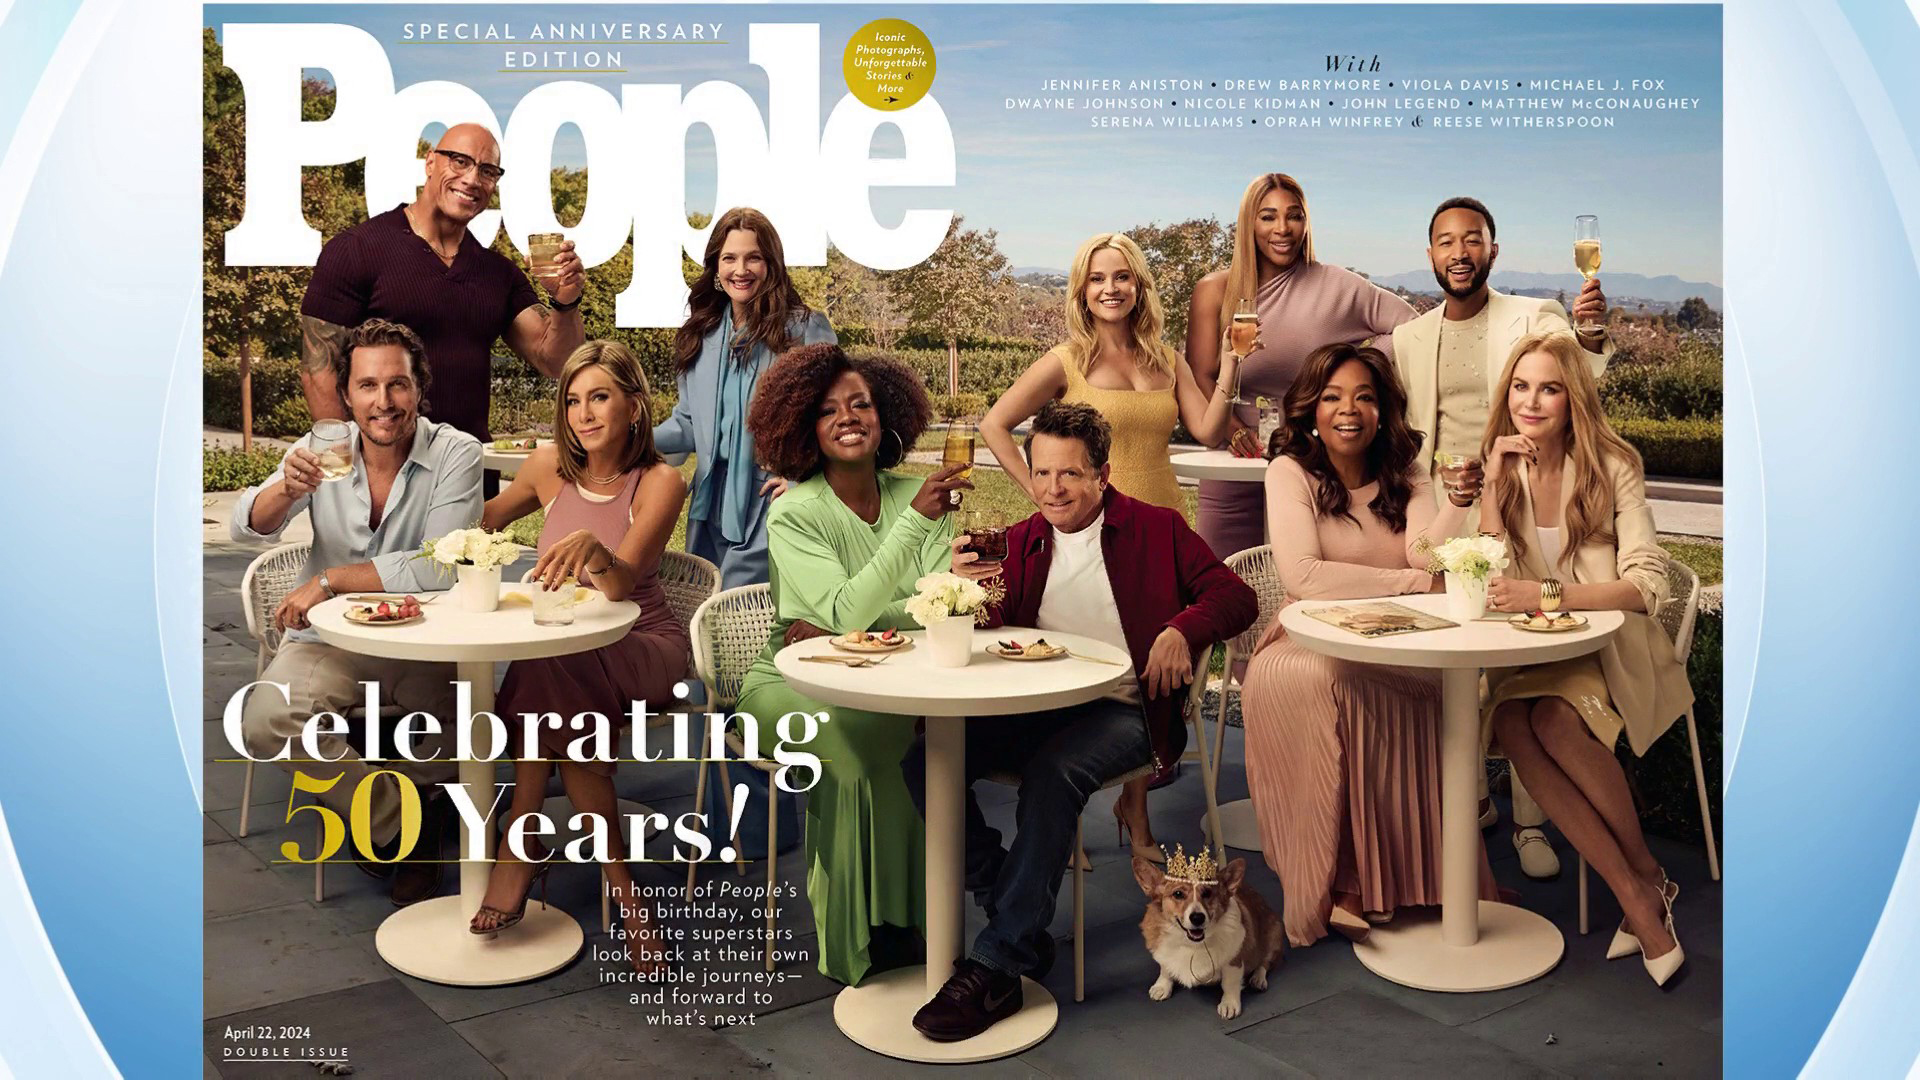 See who is on the cover for People's 50th anniversary issue